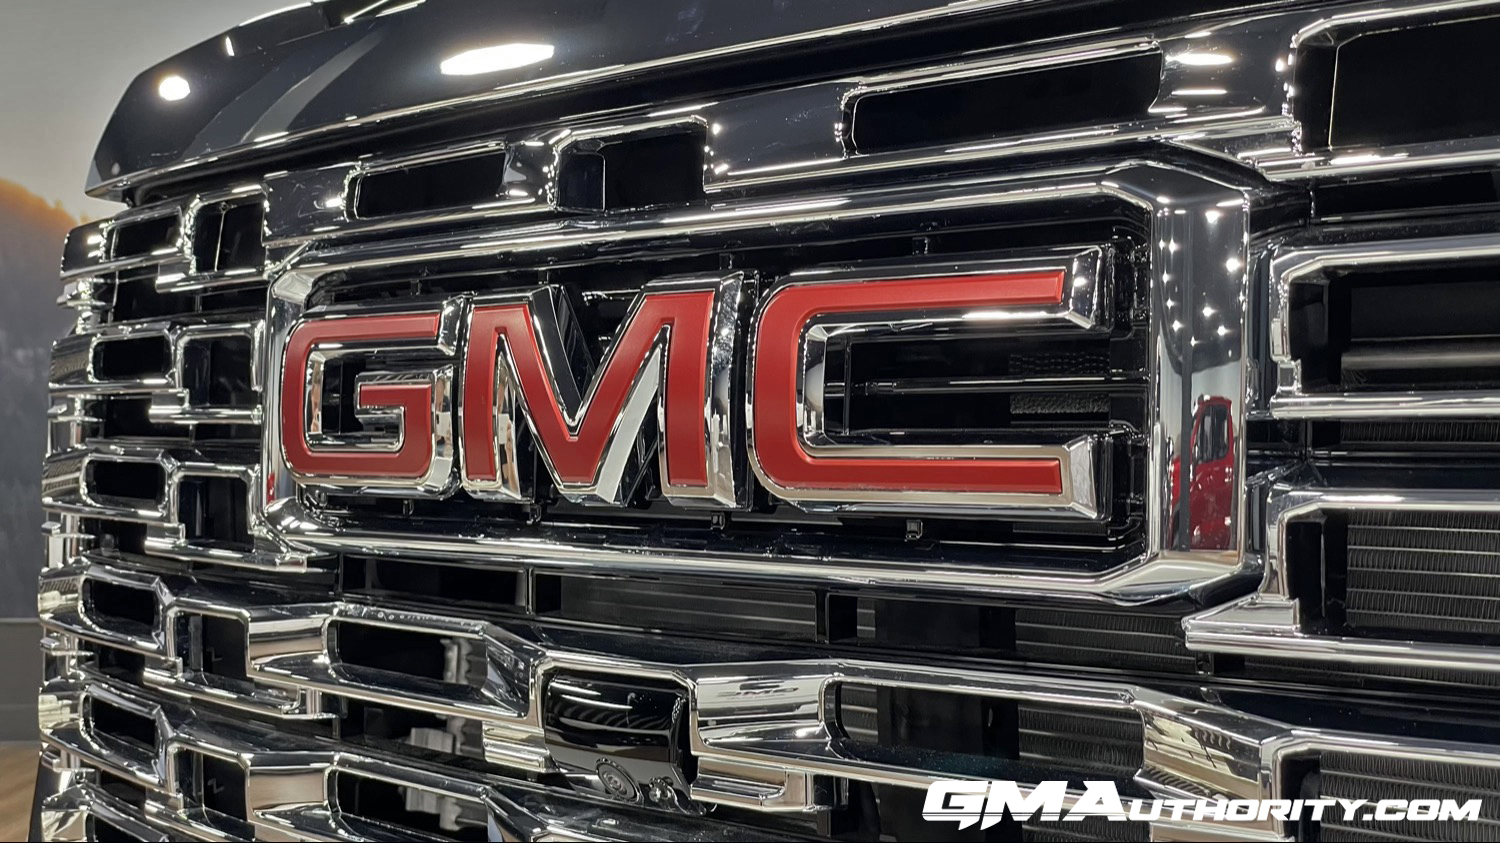 Sierra Will GMC Last The Electric HD Pickups To Be Go